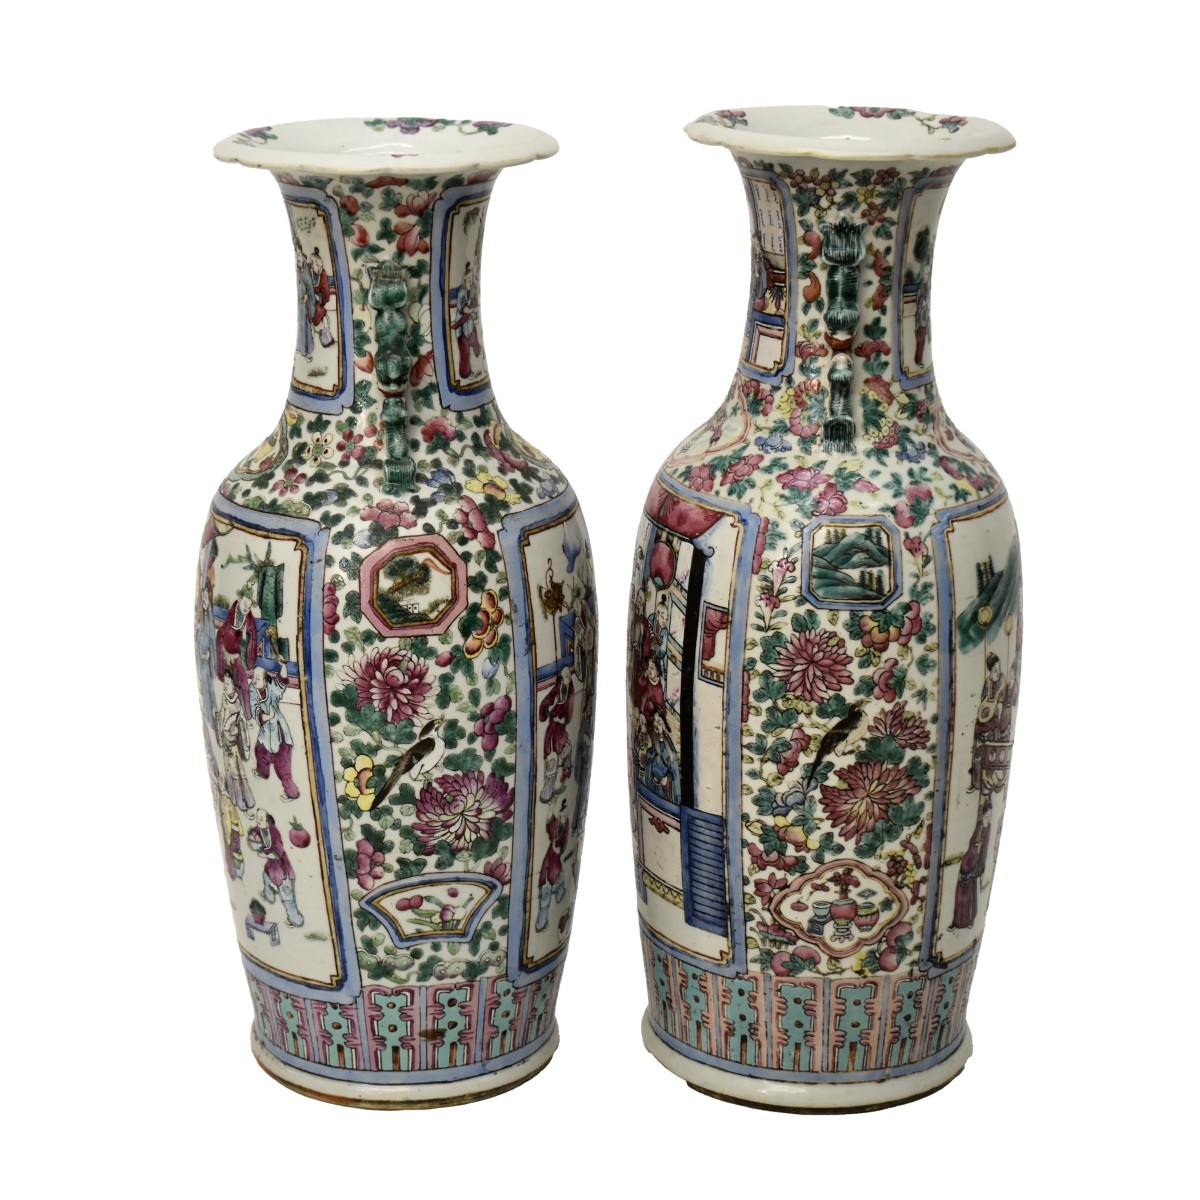 Two (2) Chinese Famille Rose Vases